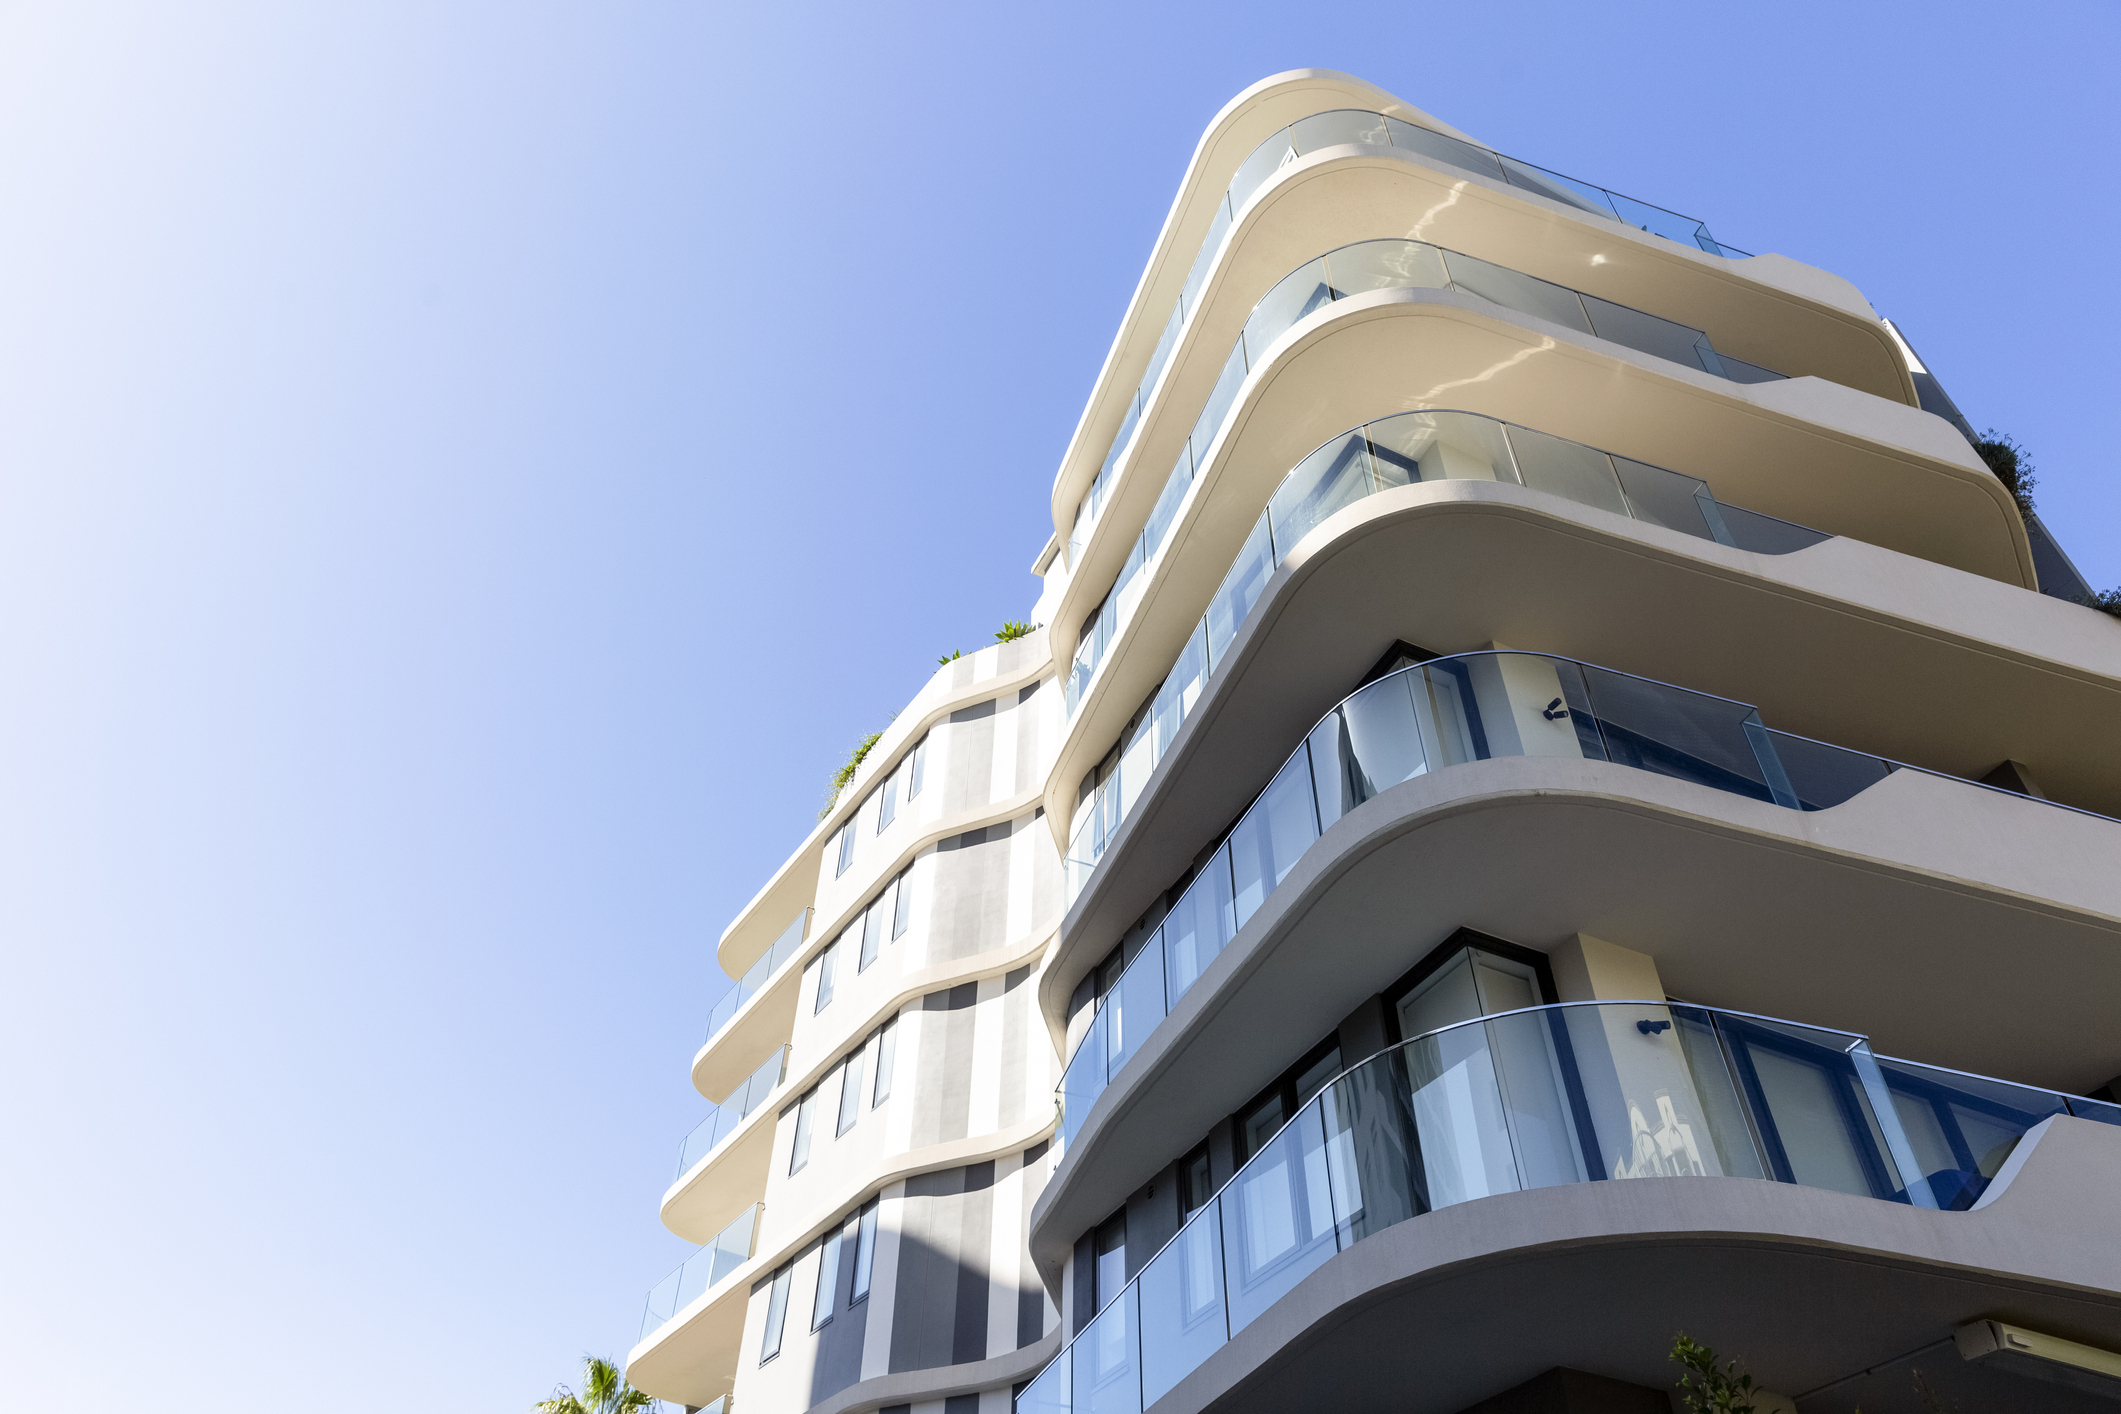 Modern apartment building, low angle view, blue sky background with copy space